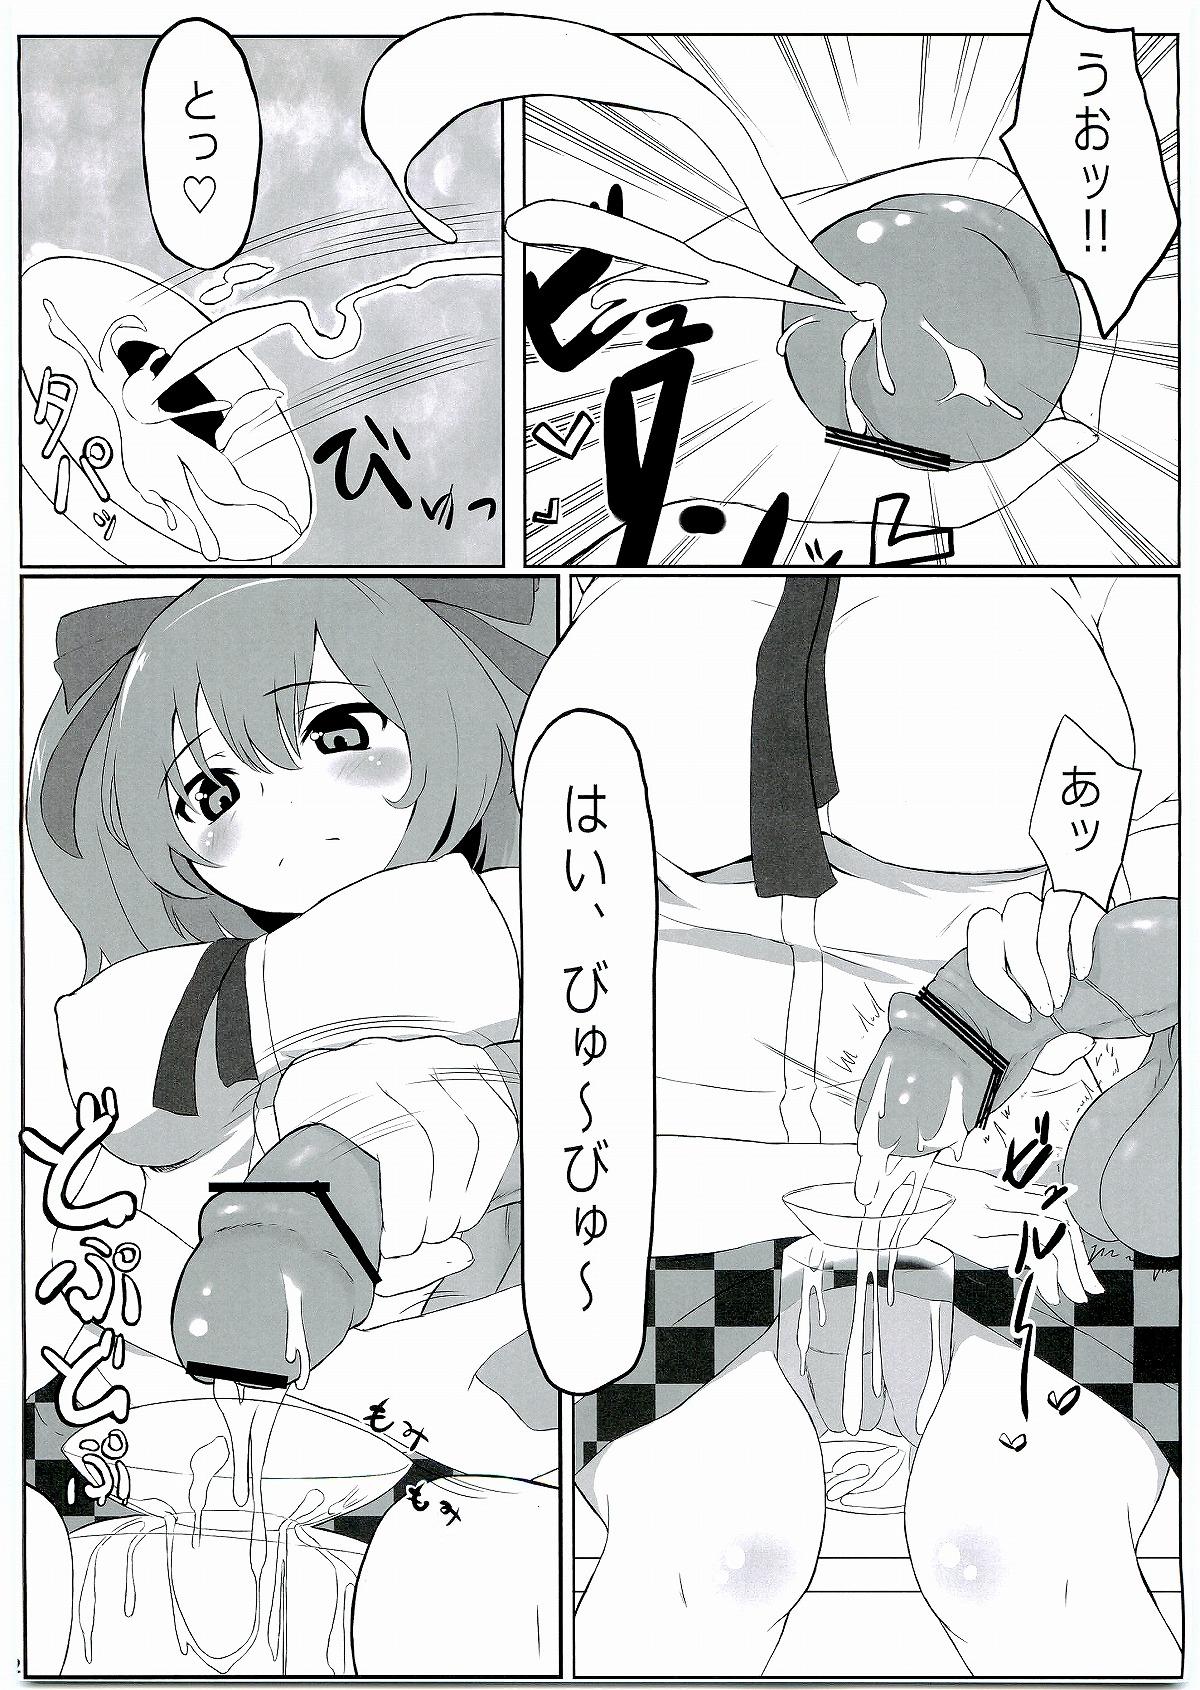 Blowing KKMK Vol. 2 - Touhou project Blows - Page 3